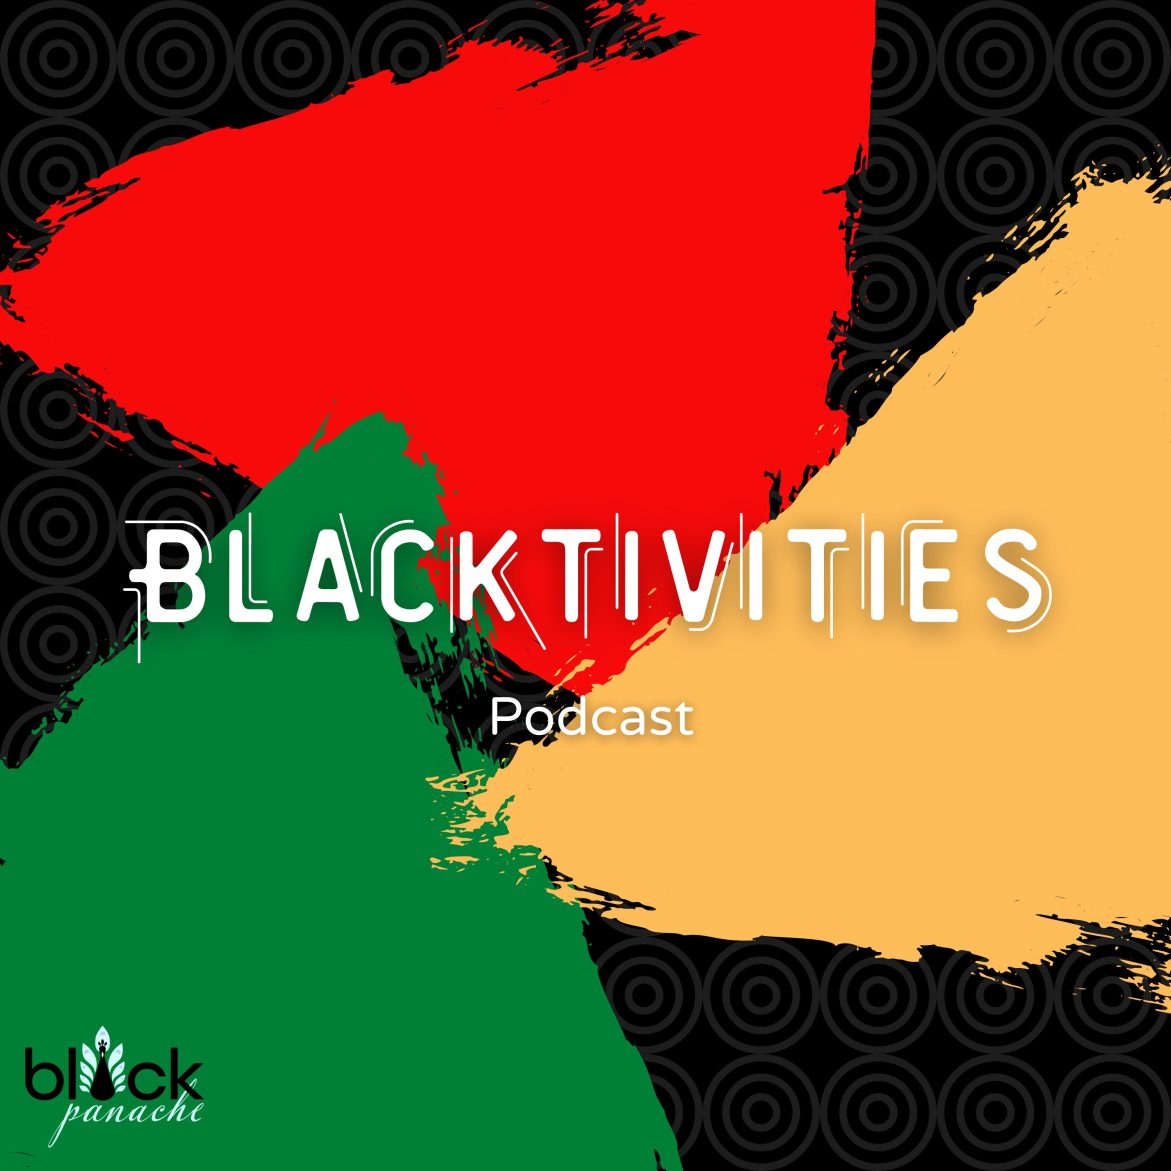 Black Podcasting - Females in Hip-Hop: Exploitation or Liberation